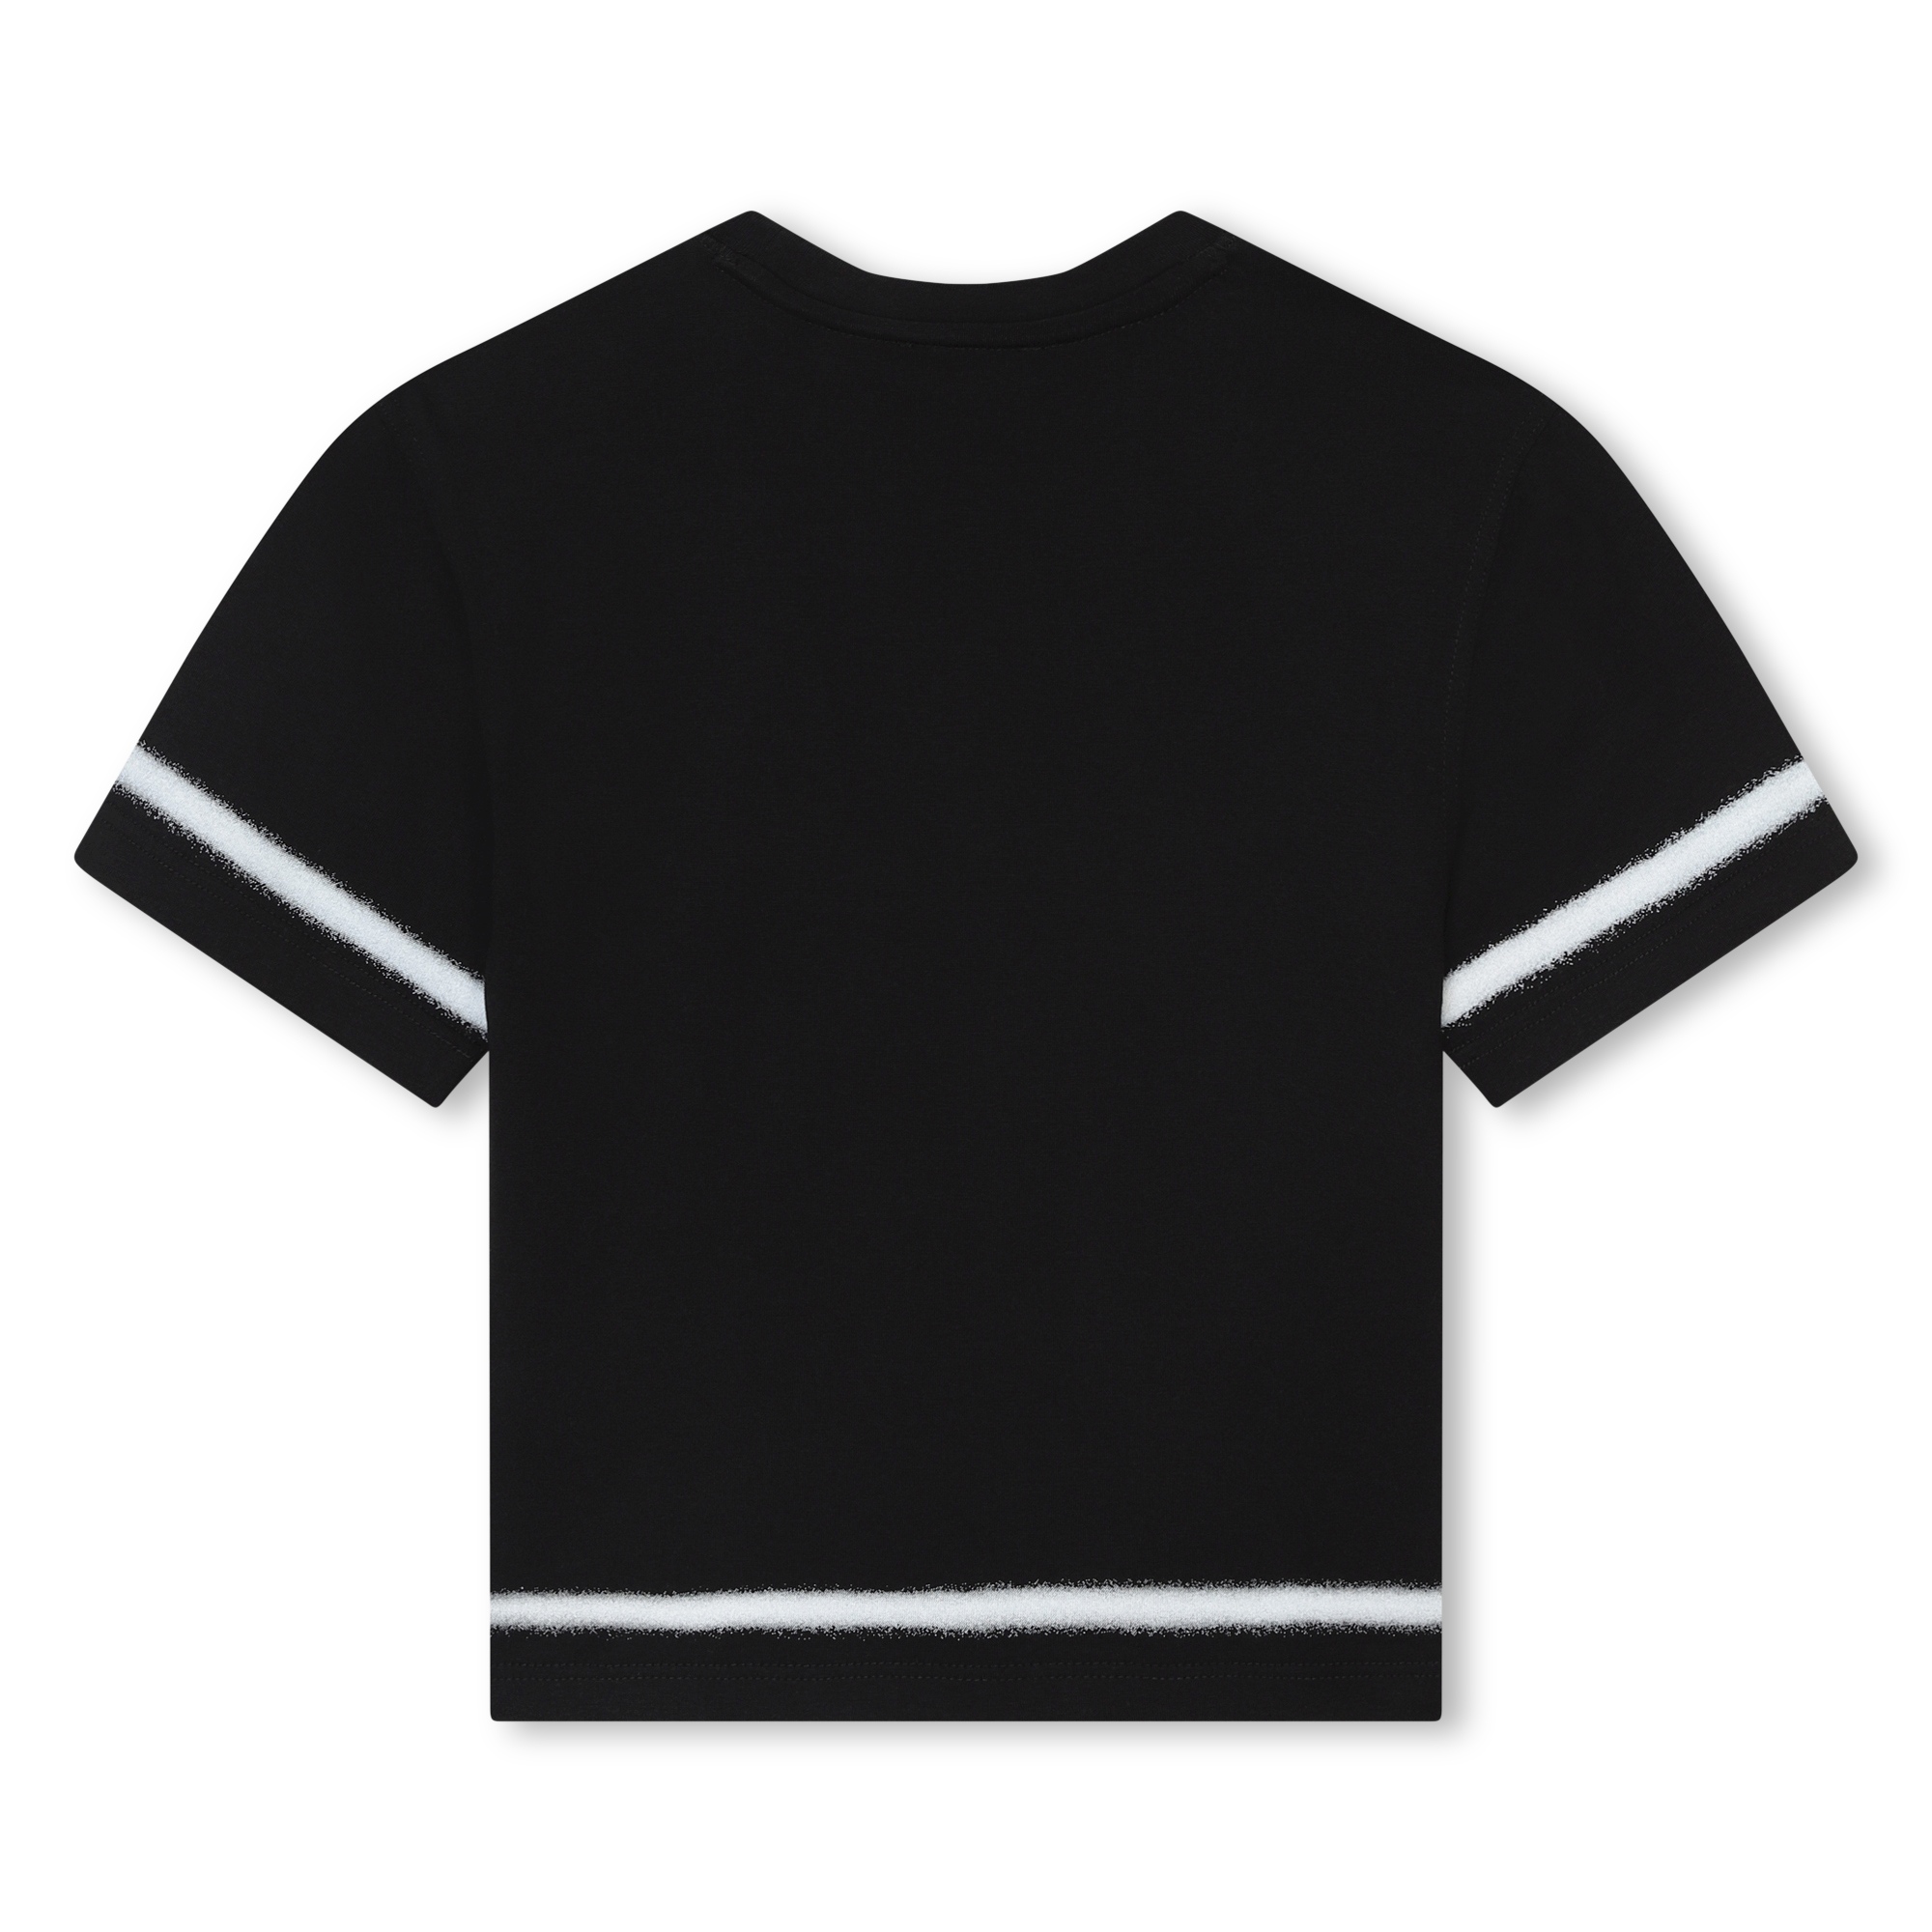 Short-sleeved cotton T-shirt MARC JACOBS for UNISEX